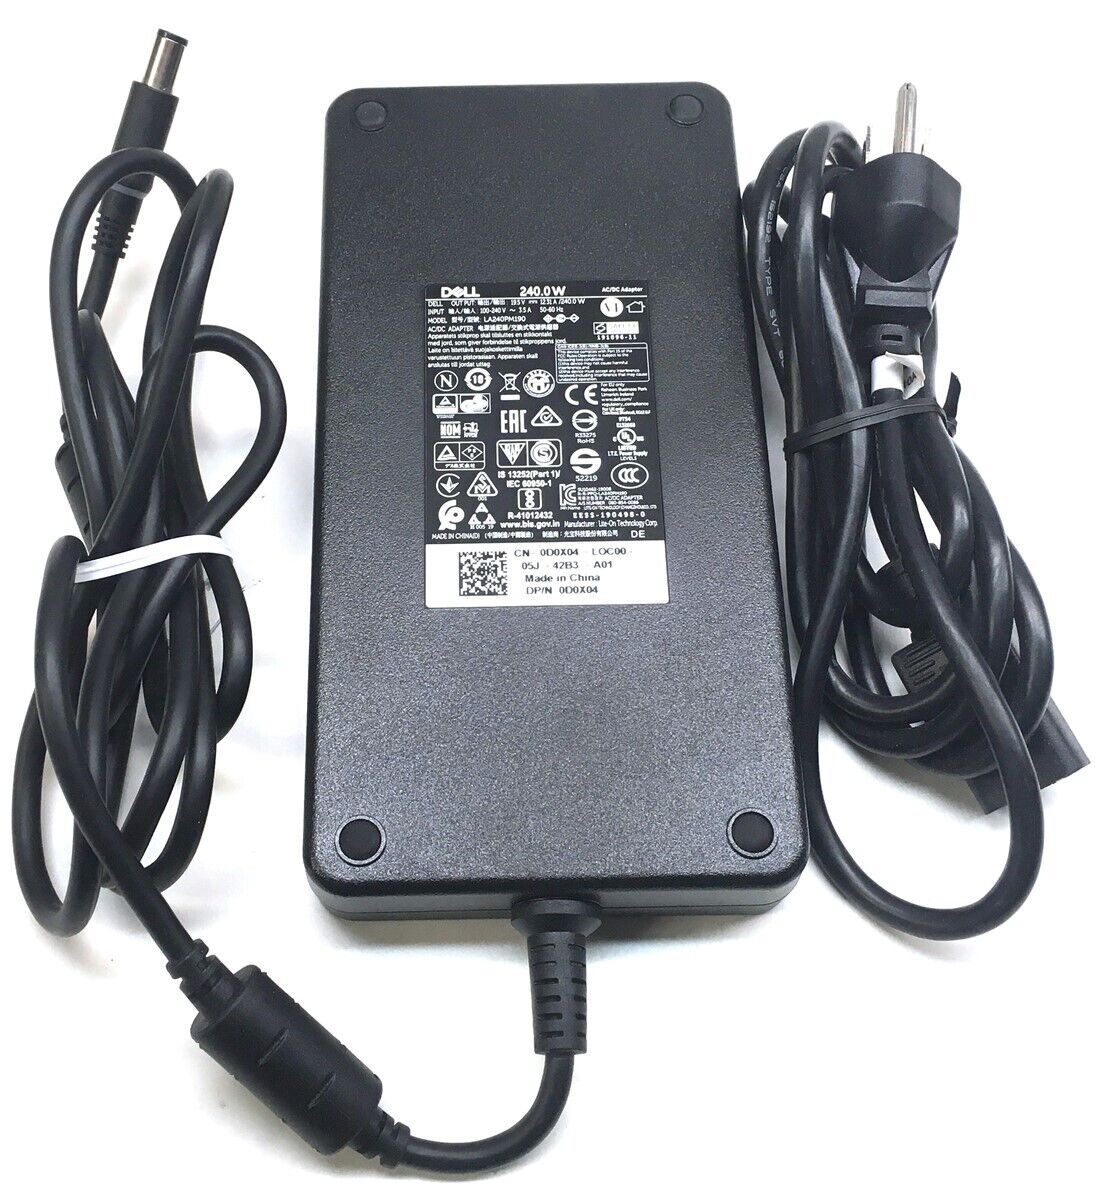 Genuine Dell Laptop Charger AC Adapter Power Supply LA240PM190 0D0X04 19.5V 240W Brand Dell Type Power Adapter Compatib